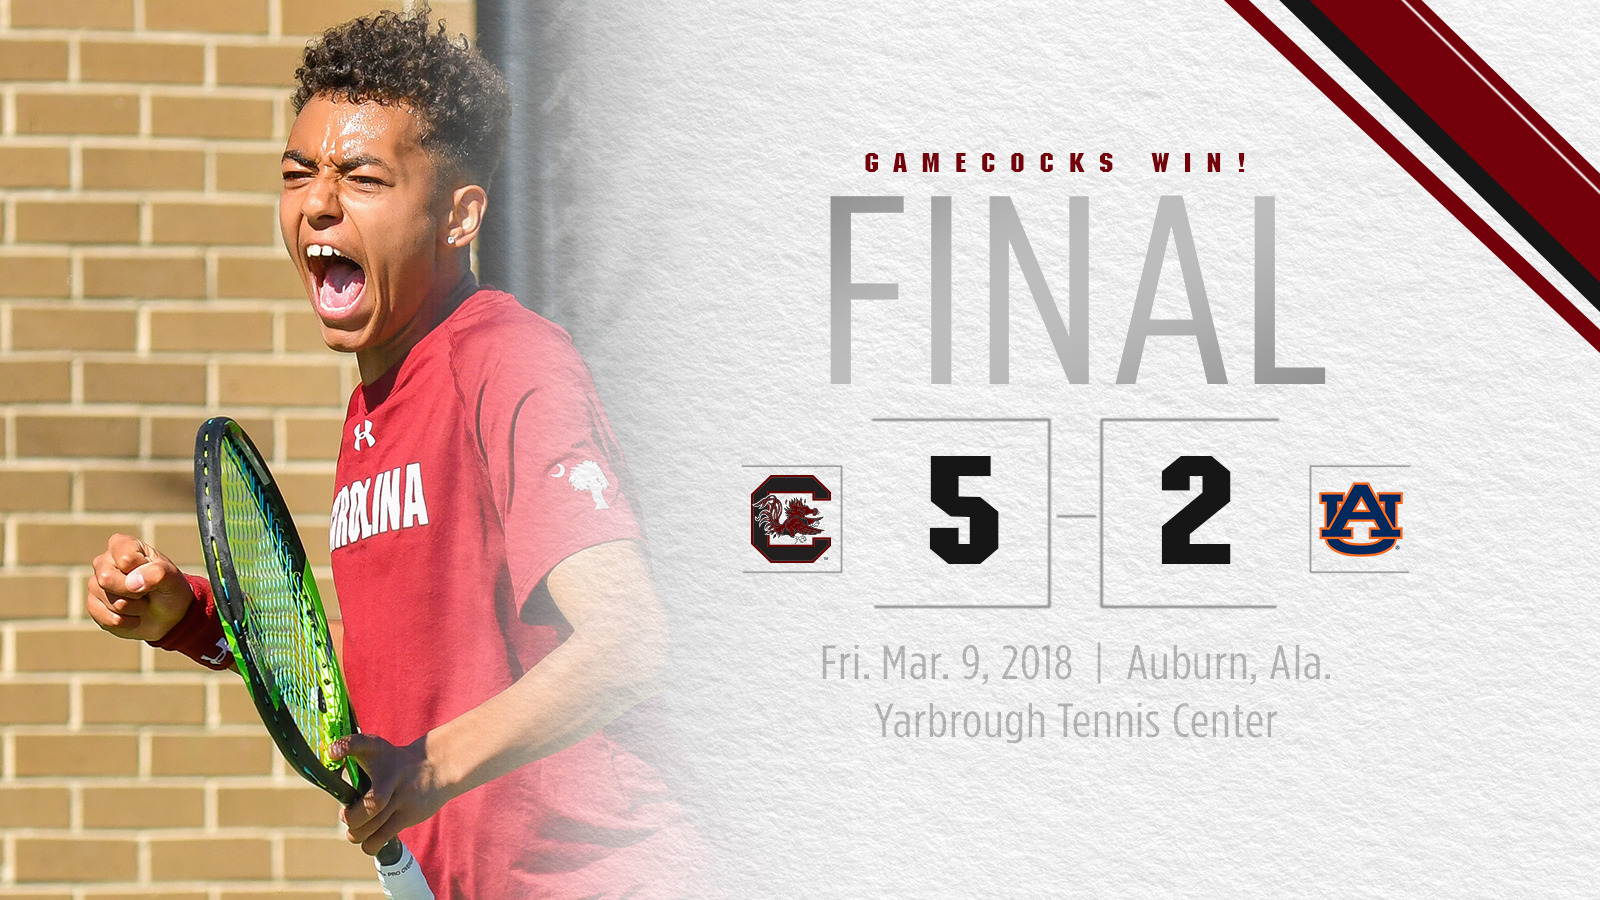 Gamecocks pick up second straight SEC win